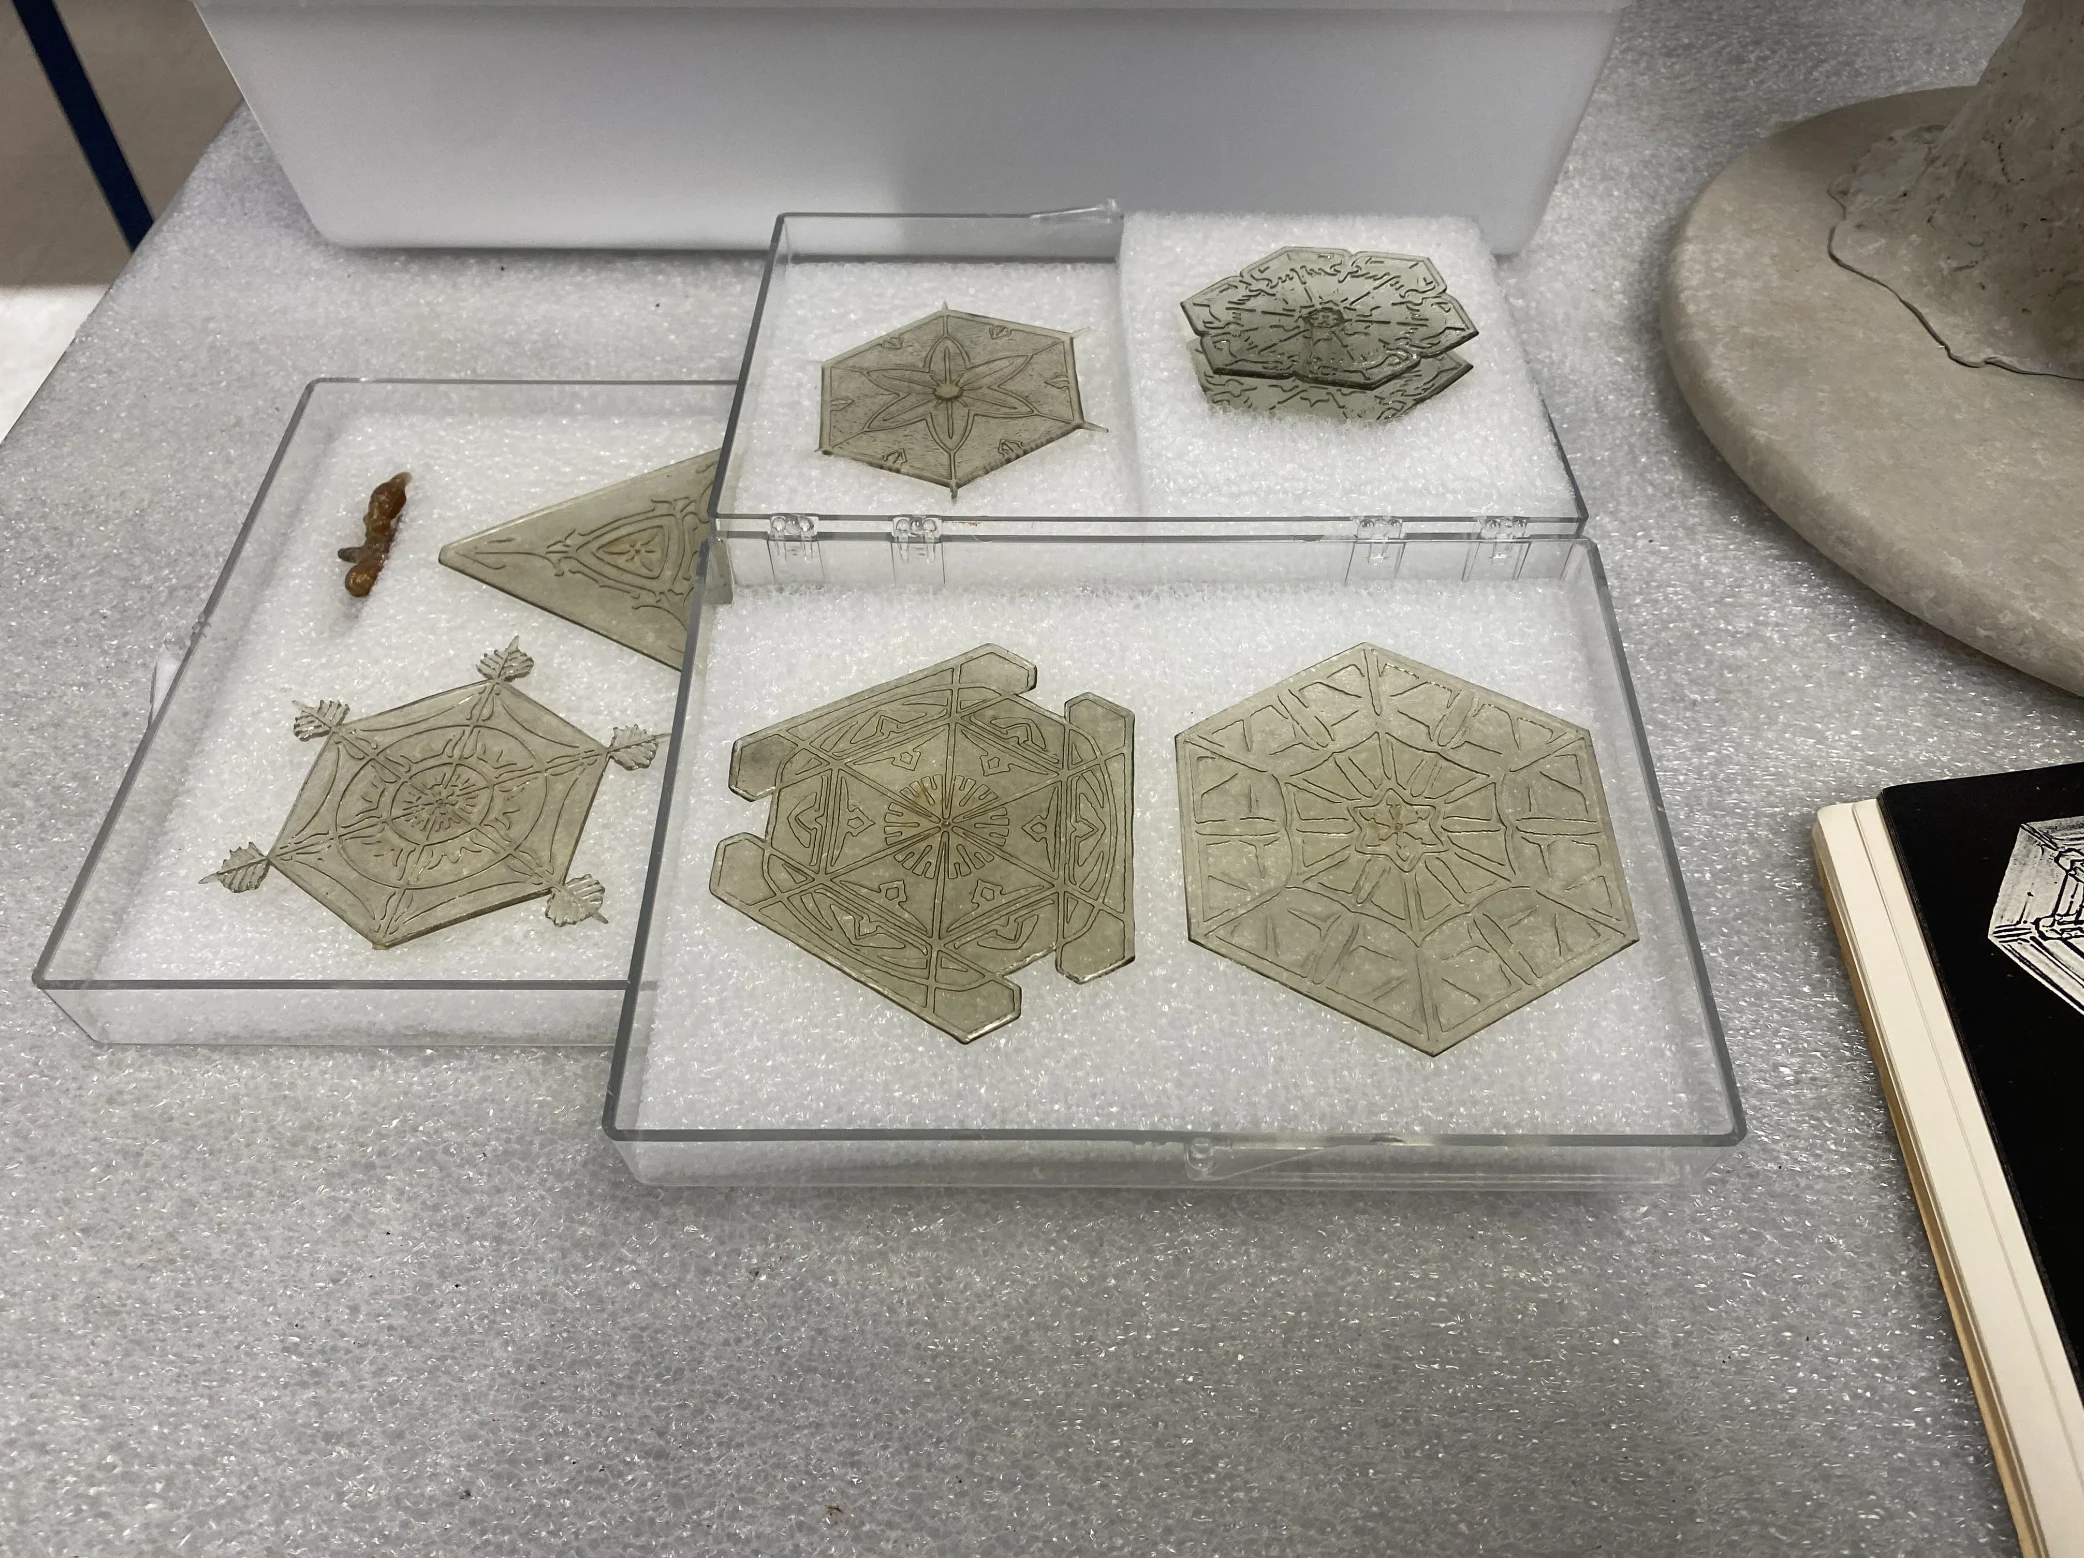 Nathan Coleman: These intricate models of snow crystals were created by Edwin Reiber for the Cranbrook Institute of Science (Michigan). The models were the "first accurate models of snow crystals" 3